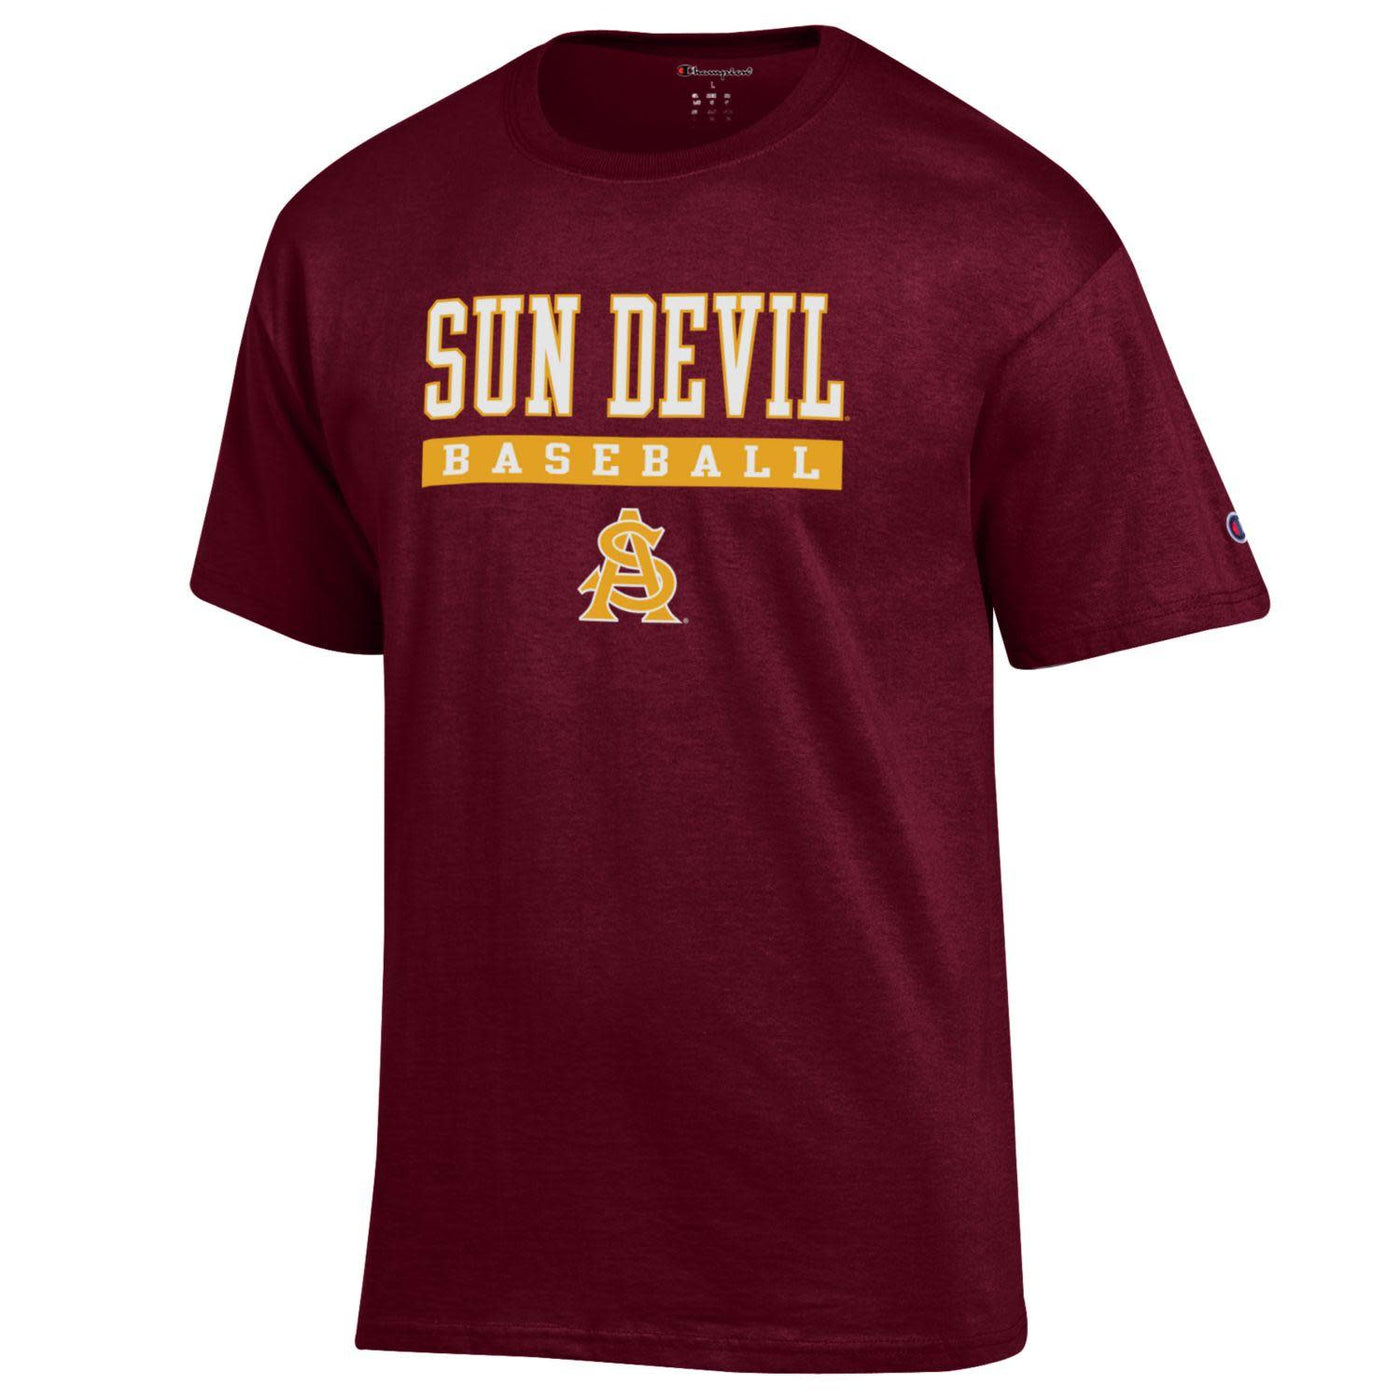 ASU maroon tee with 'Sun Devil Baseball' what lettering and an interlocking 'A' and 'S' in white and gold 